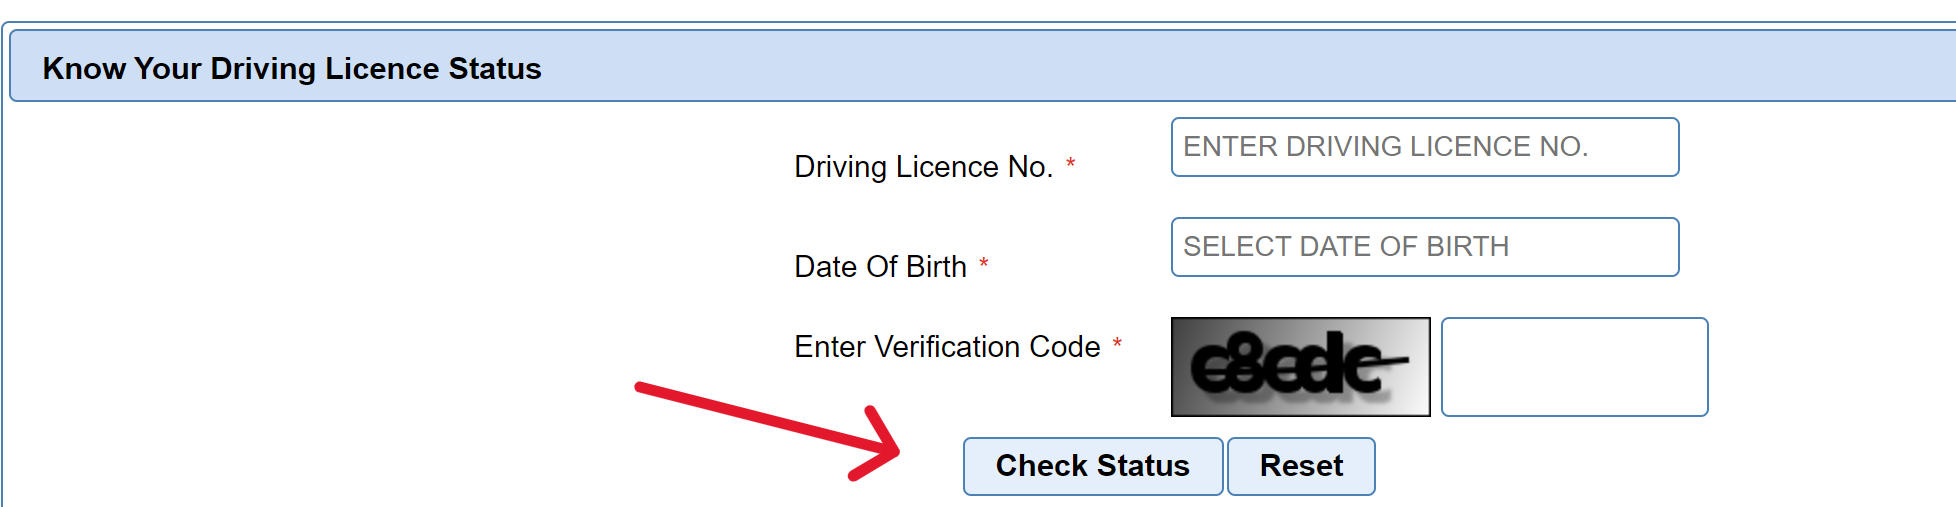 Know Your Driving Licence Status